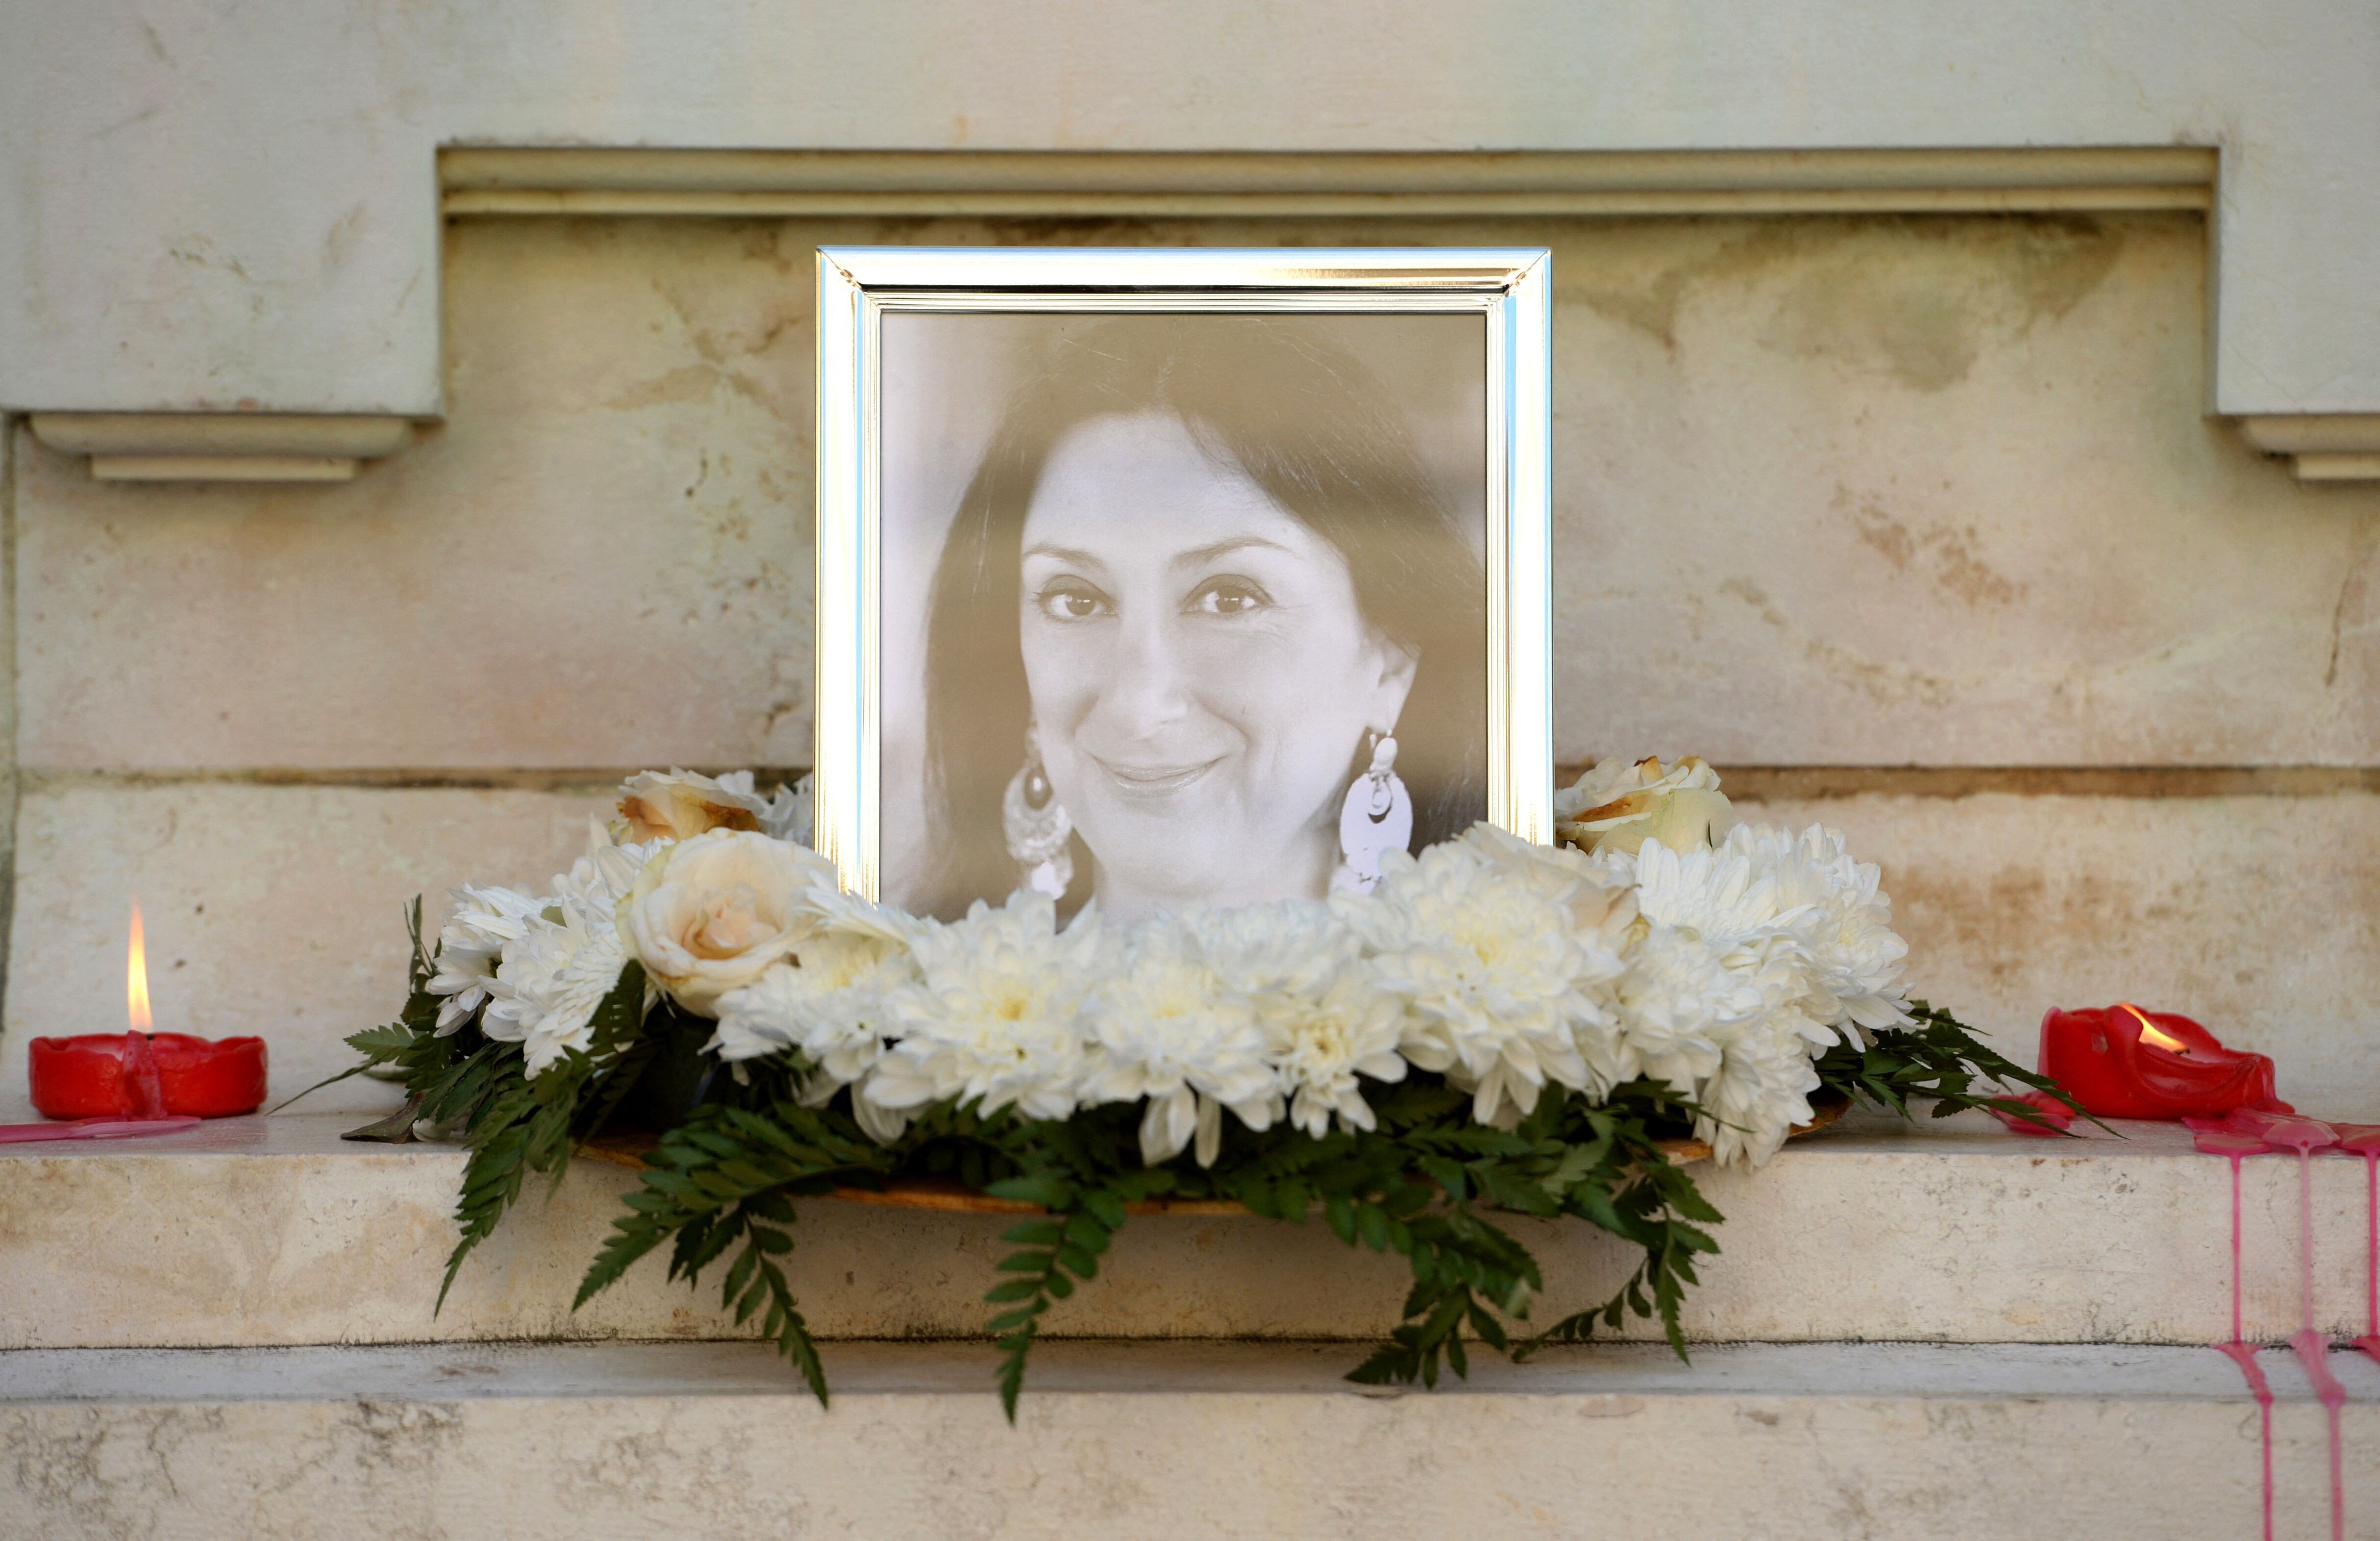 Flowers and tributes lie at the foot of the Great Siege monument in Valletta, which was turned into a temporary shrine for Maltese journalist Daphne Caruana Galizia after she was killed by a car bomb in October 2017. Photo: AFP